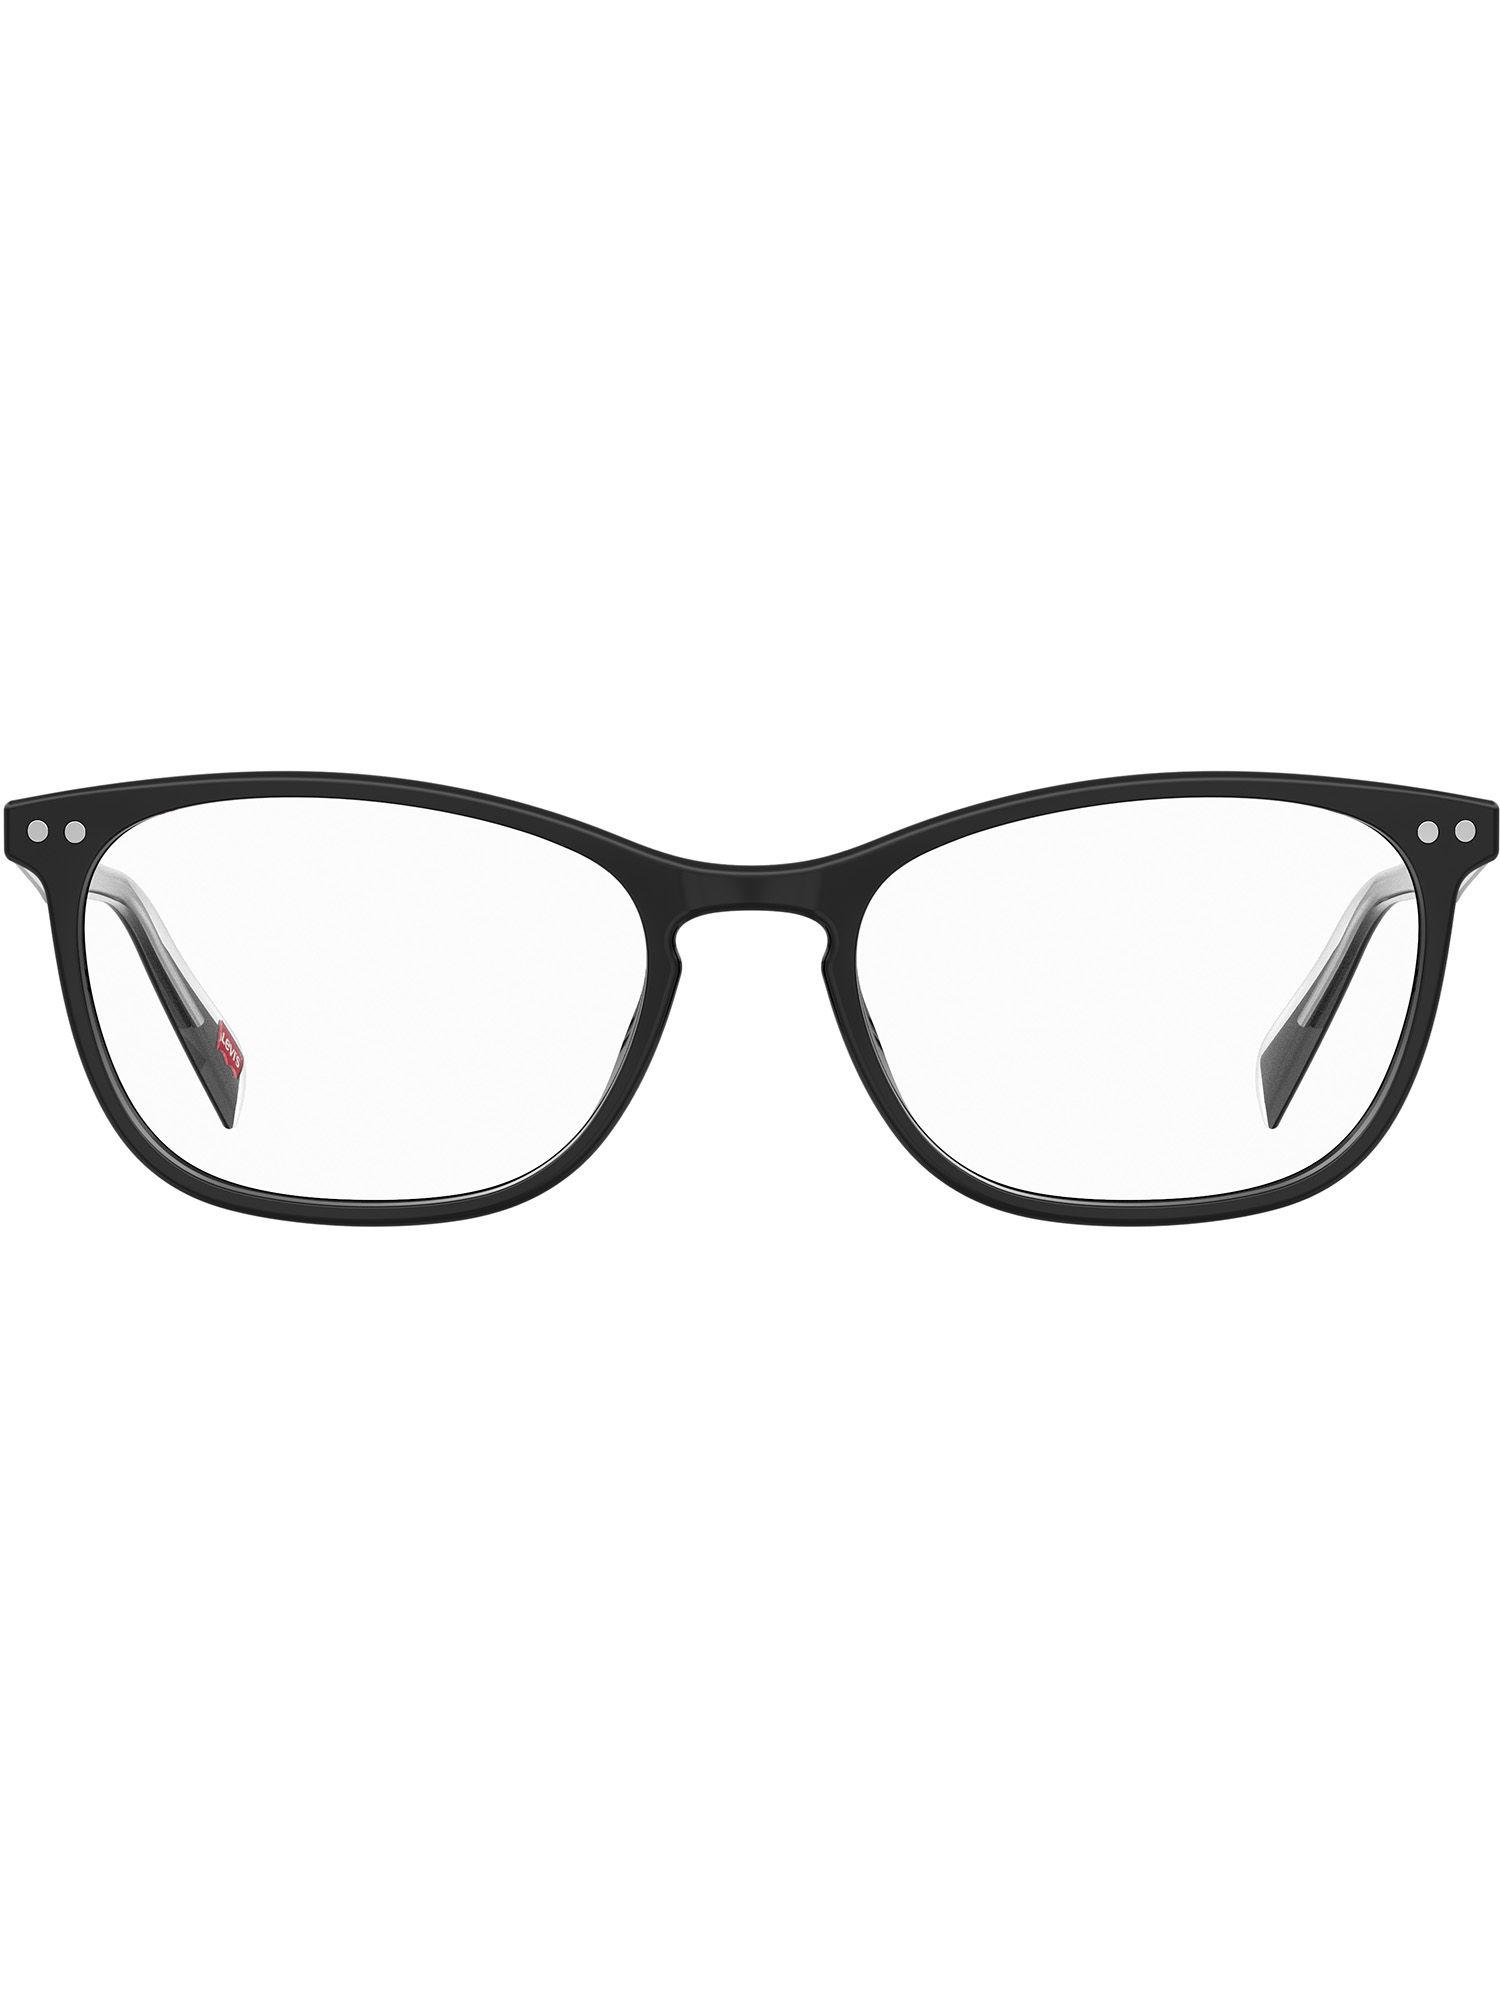 cat eye-butterfly frame for women eco pmma material in black colour (lv 5026 807 5217)